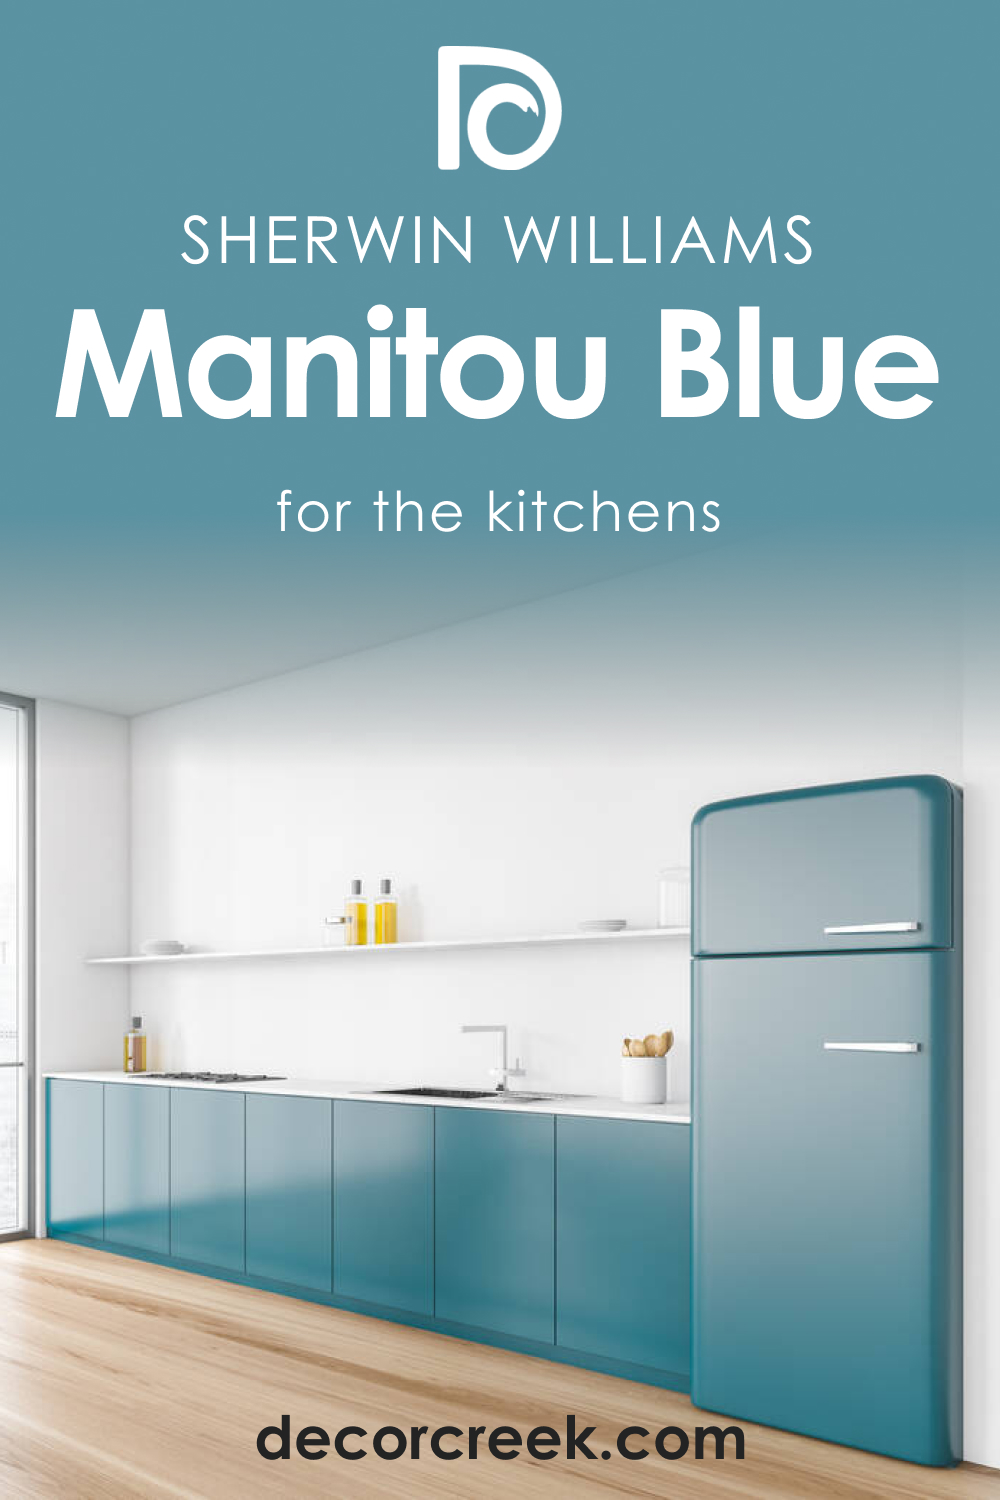 How to Use SW 6501 Manitou Blue in the Kitchen?